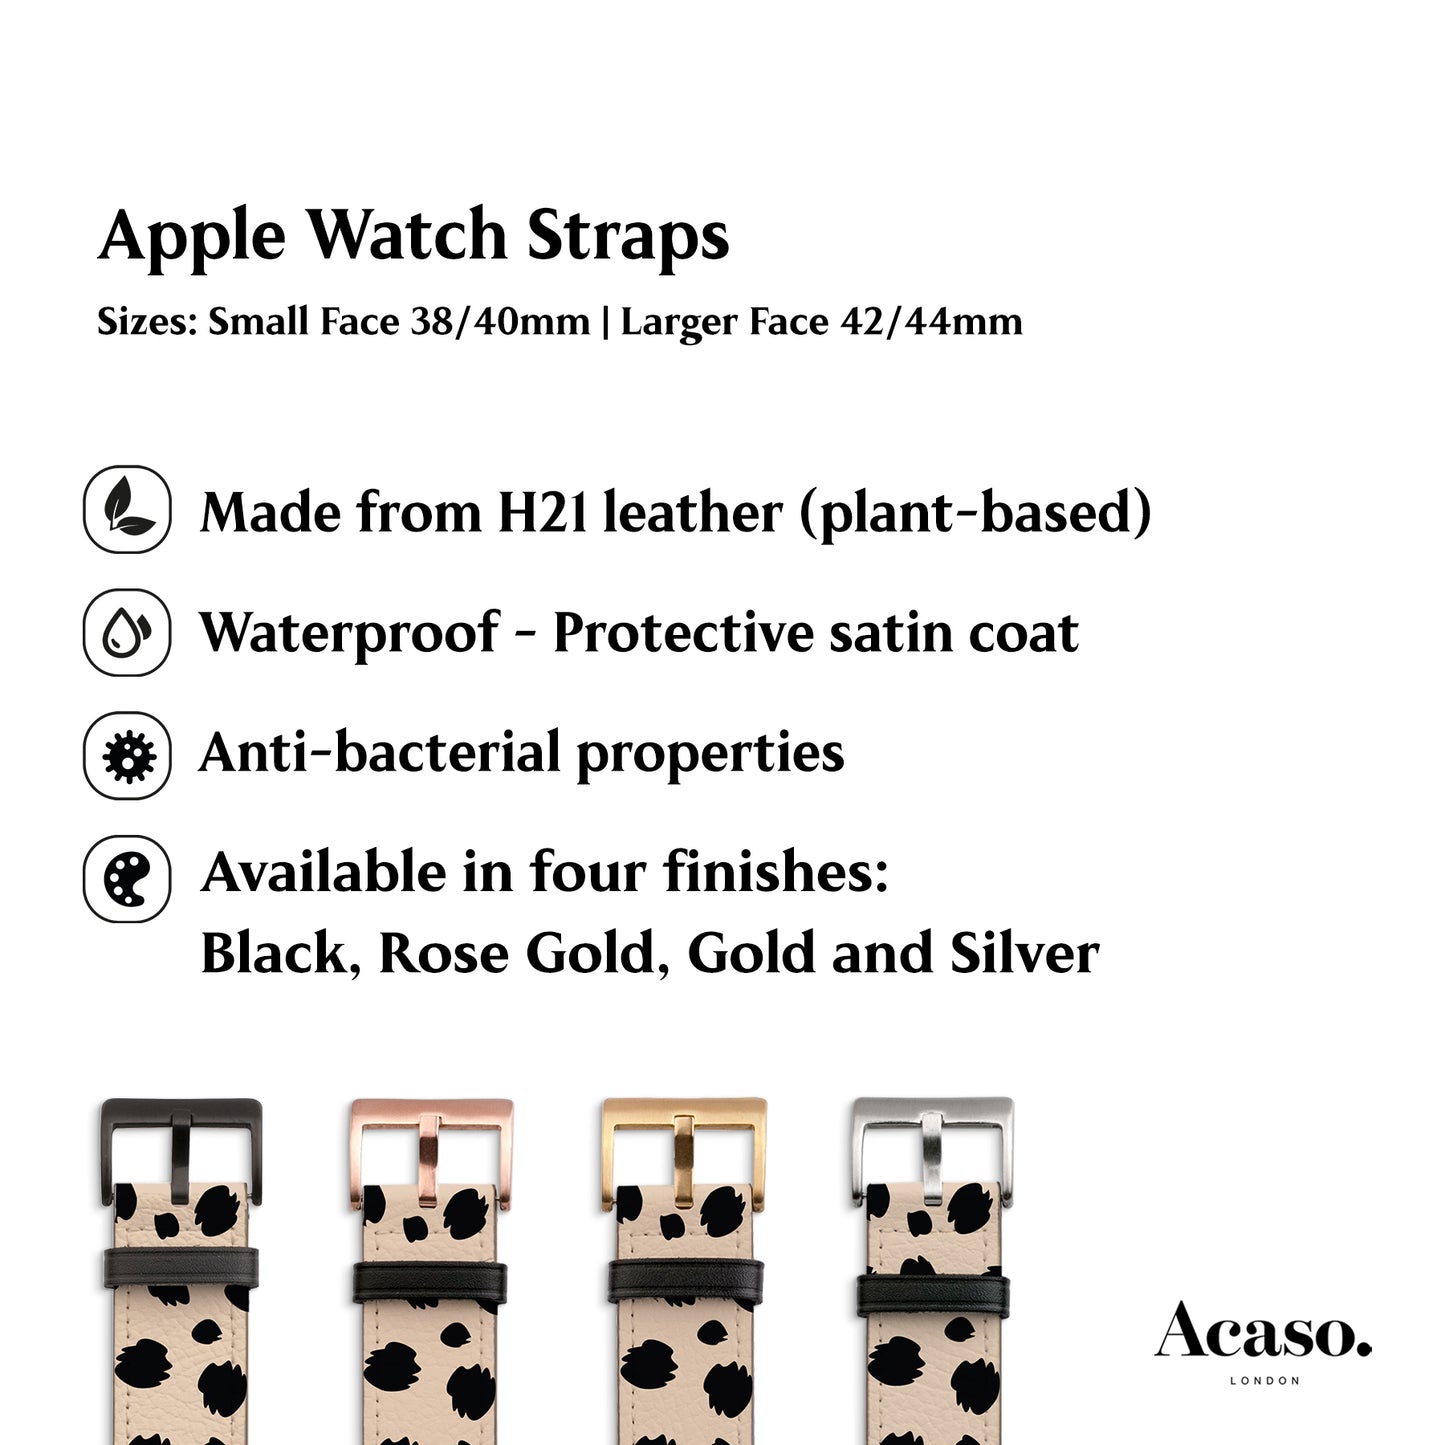 the apple watch strap features different patterns and colors